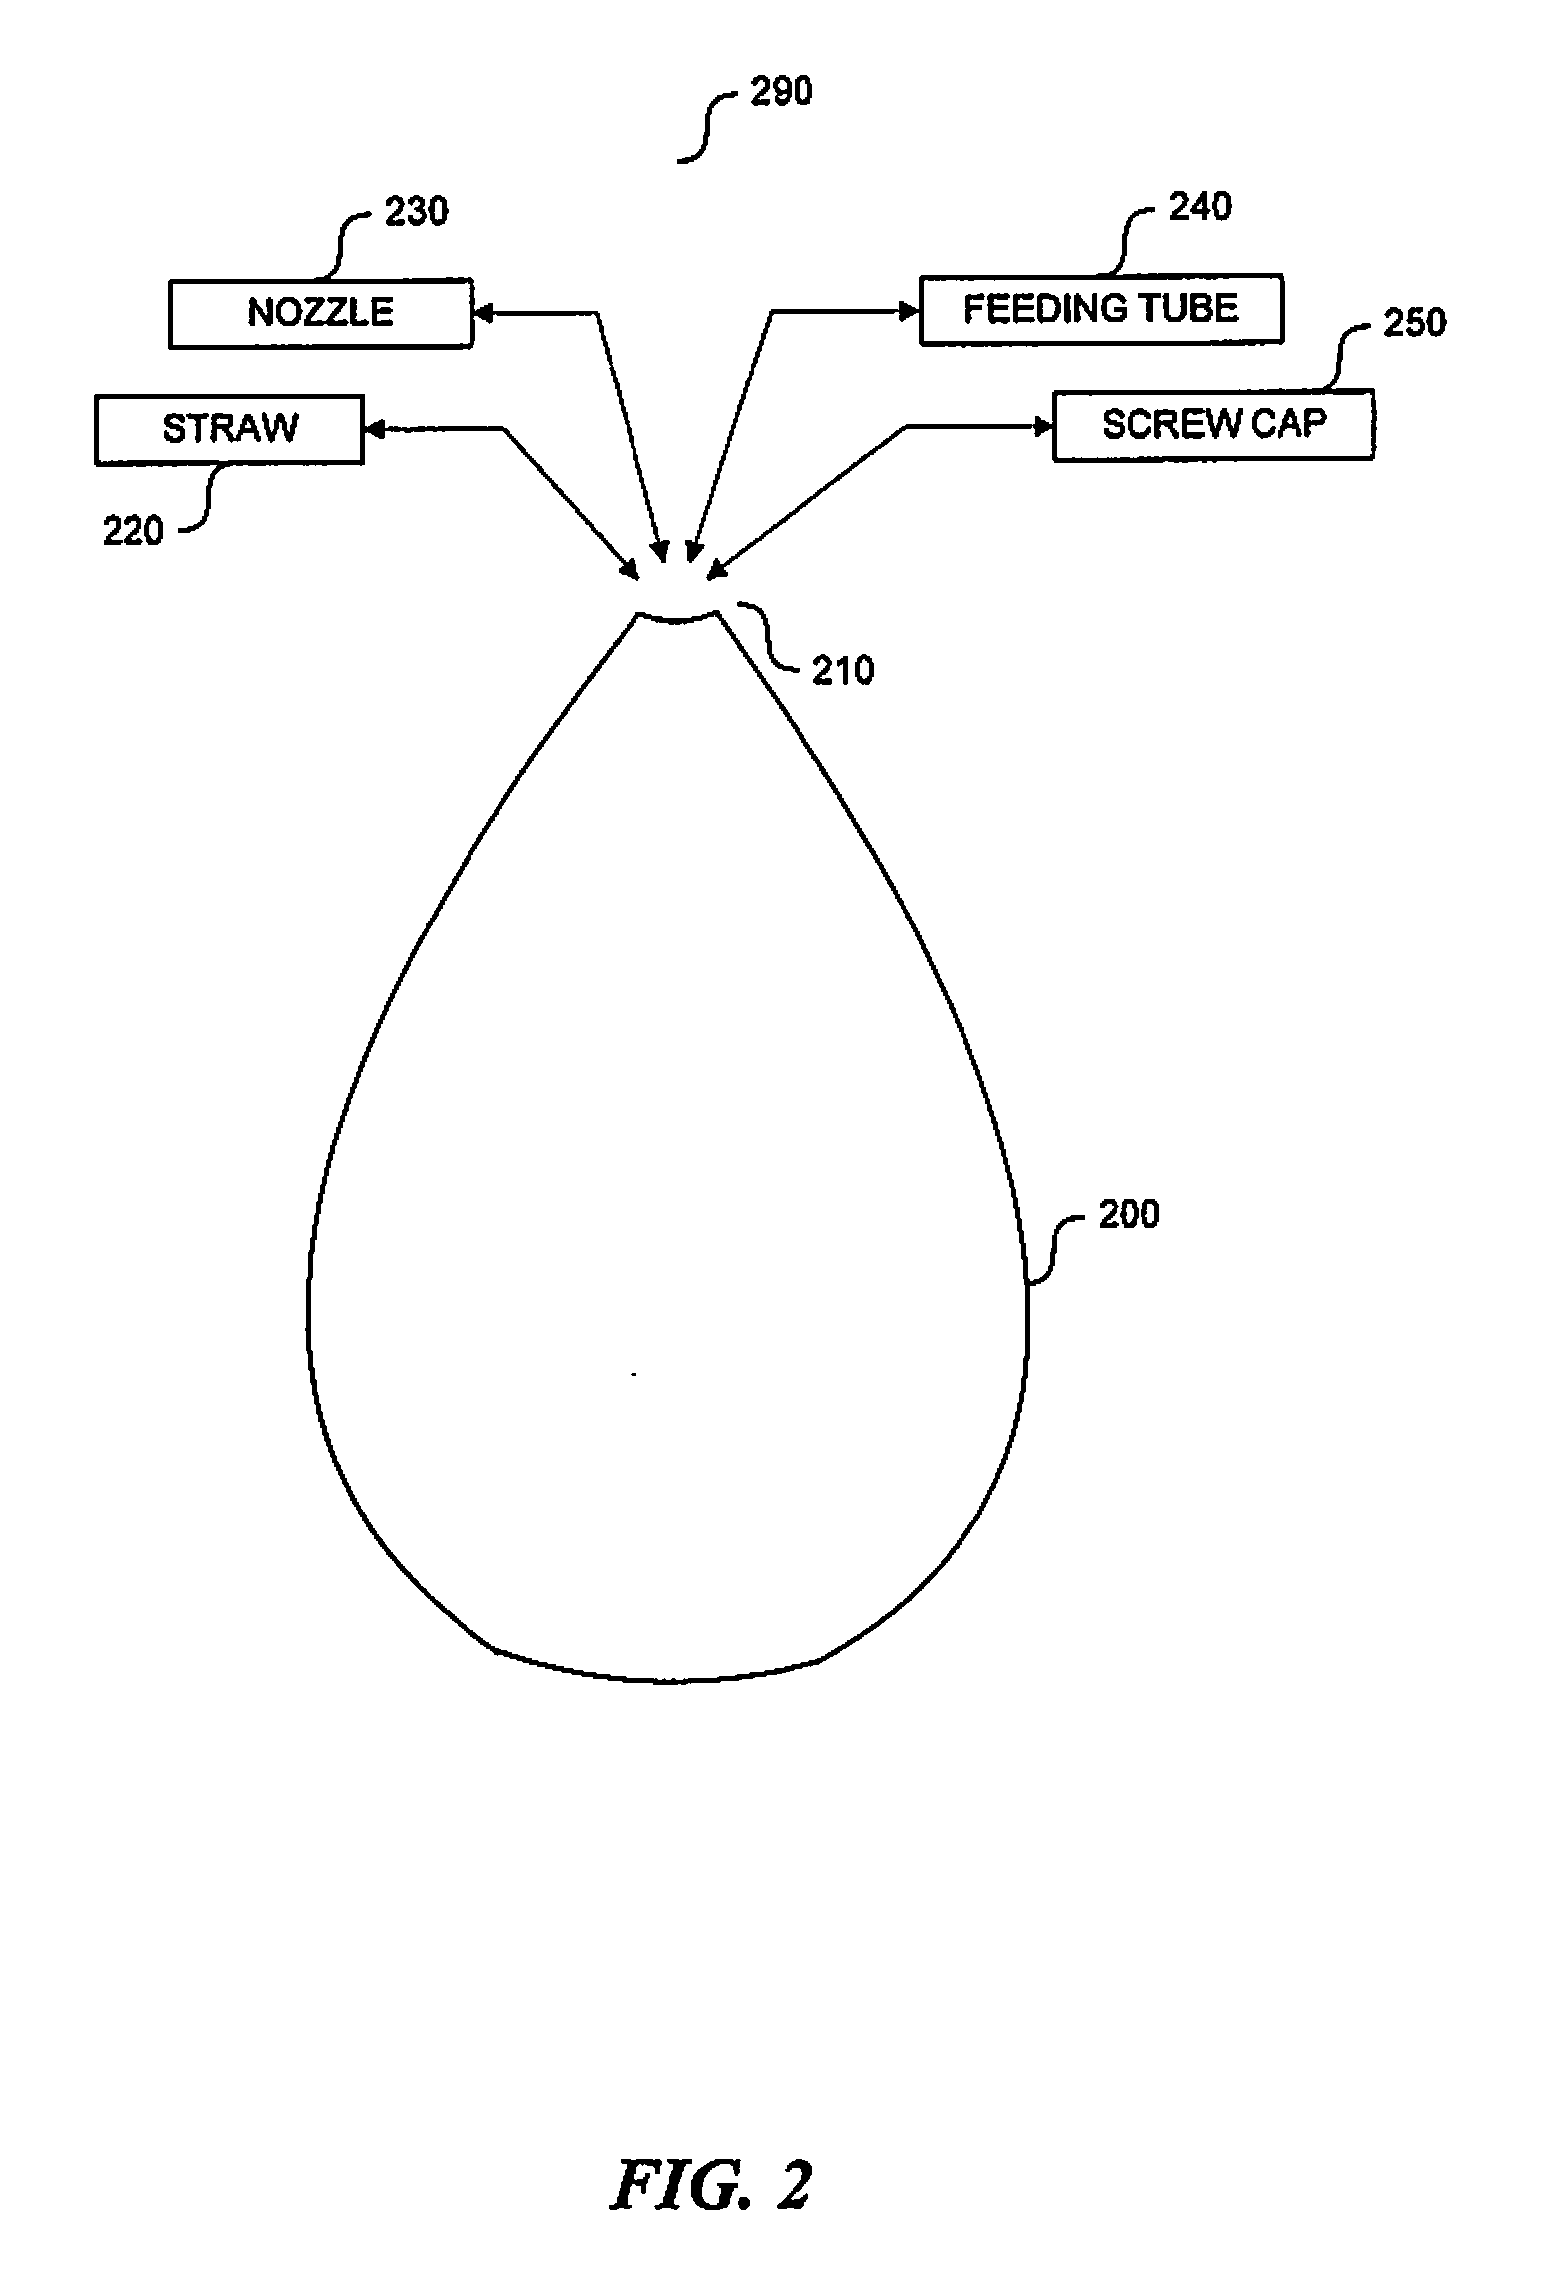 Apparatus and methods to implement a versatile liquid storage and delivery mechanism